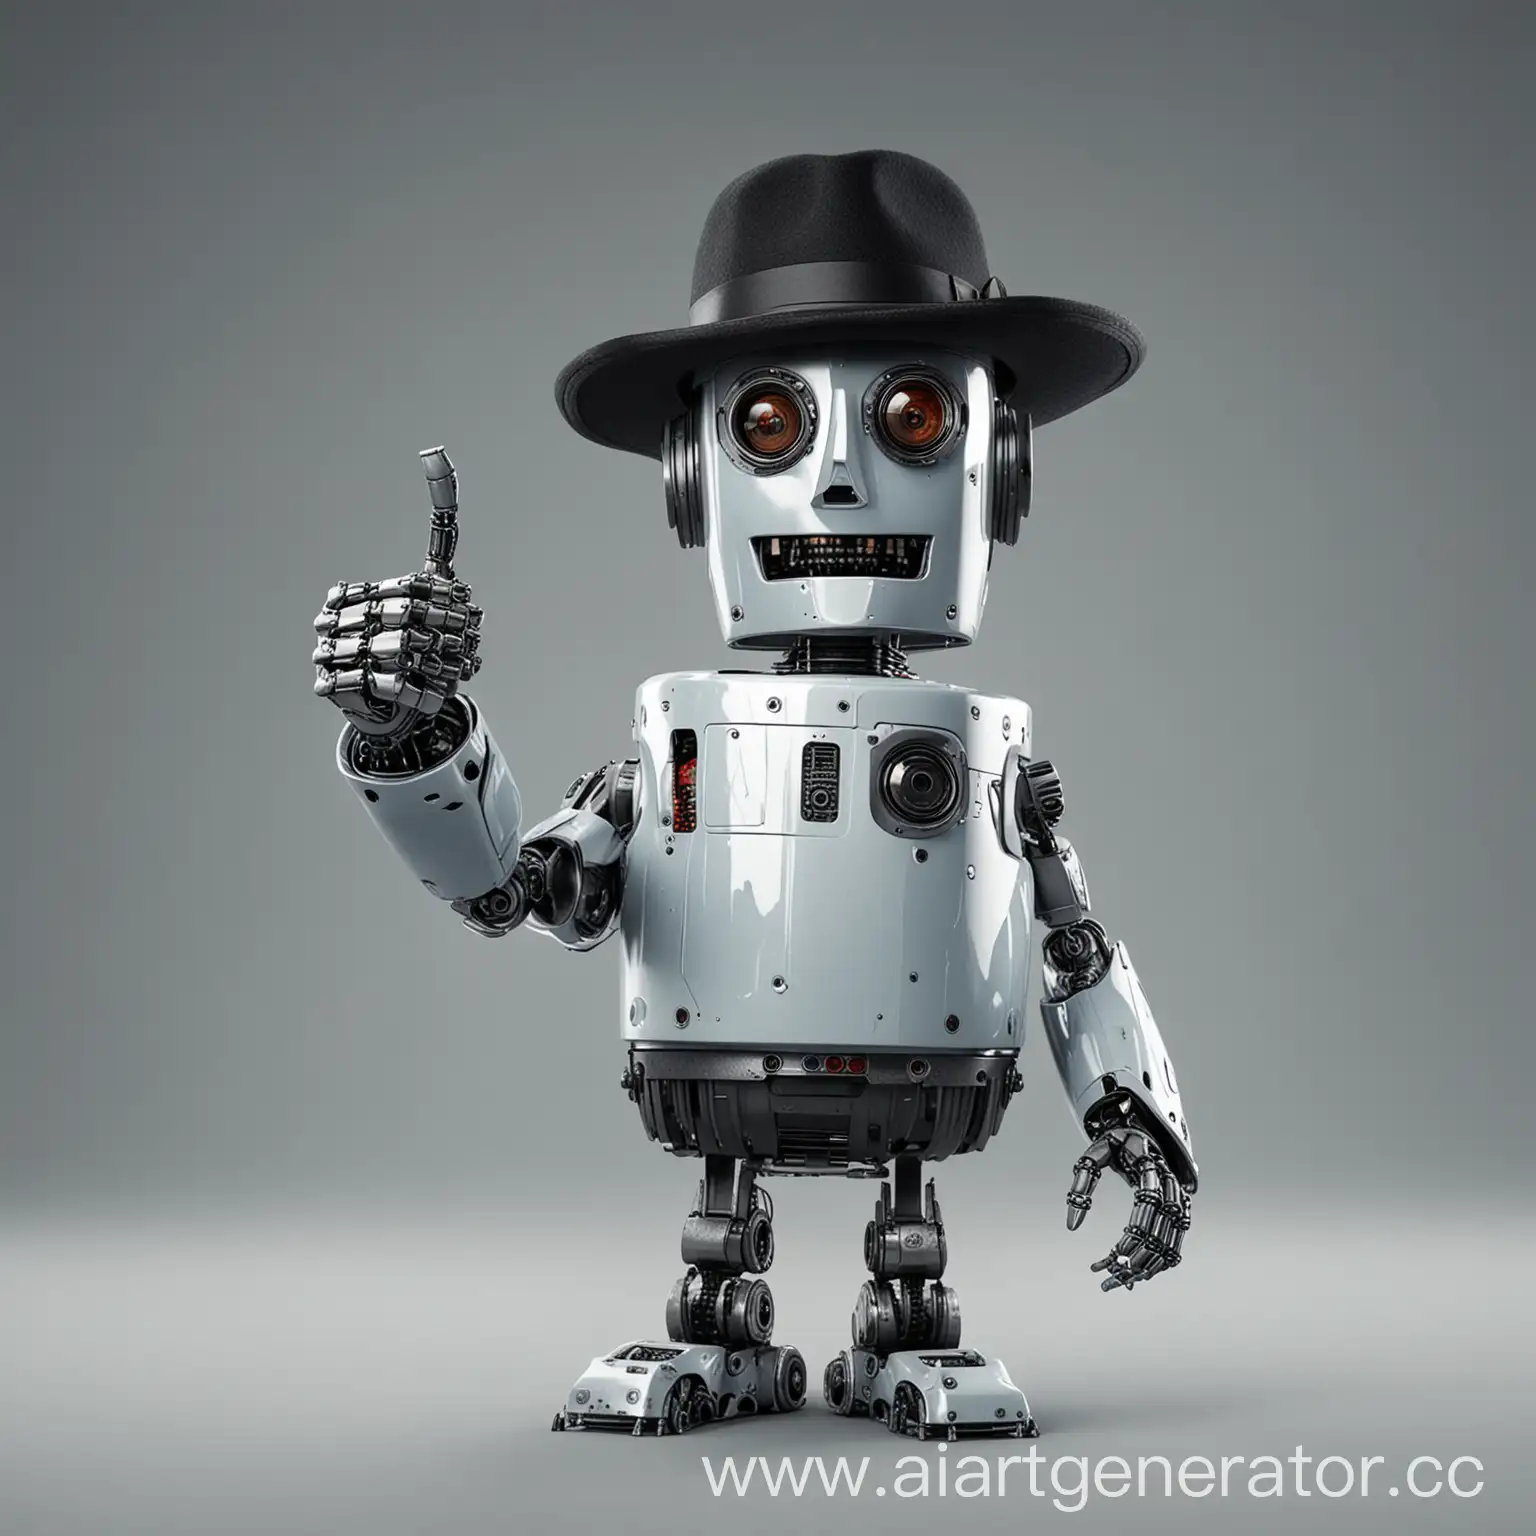 Robot-Showing-Thumbs-Up-in-Stylish-Hat